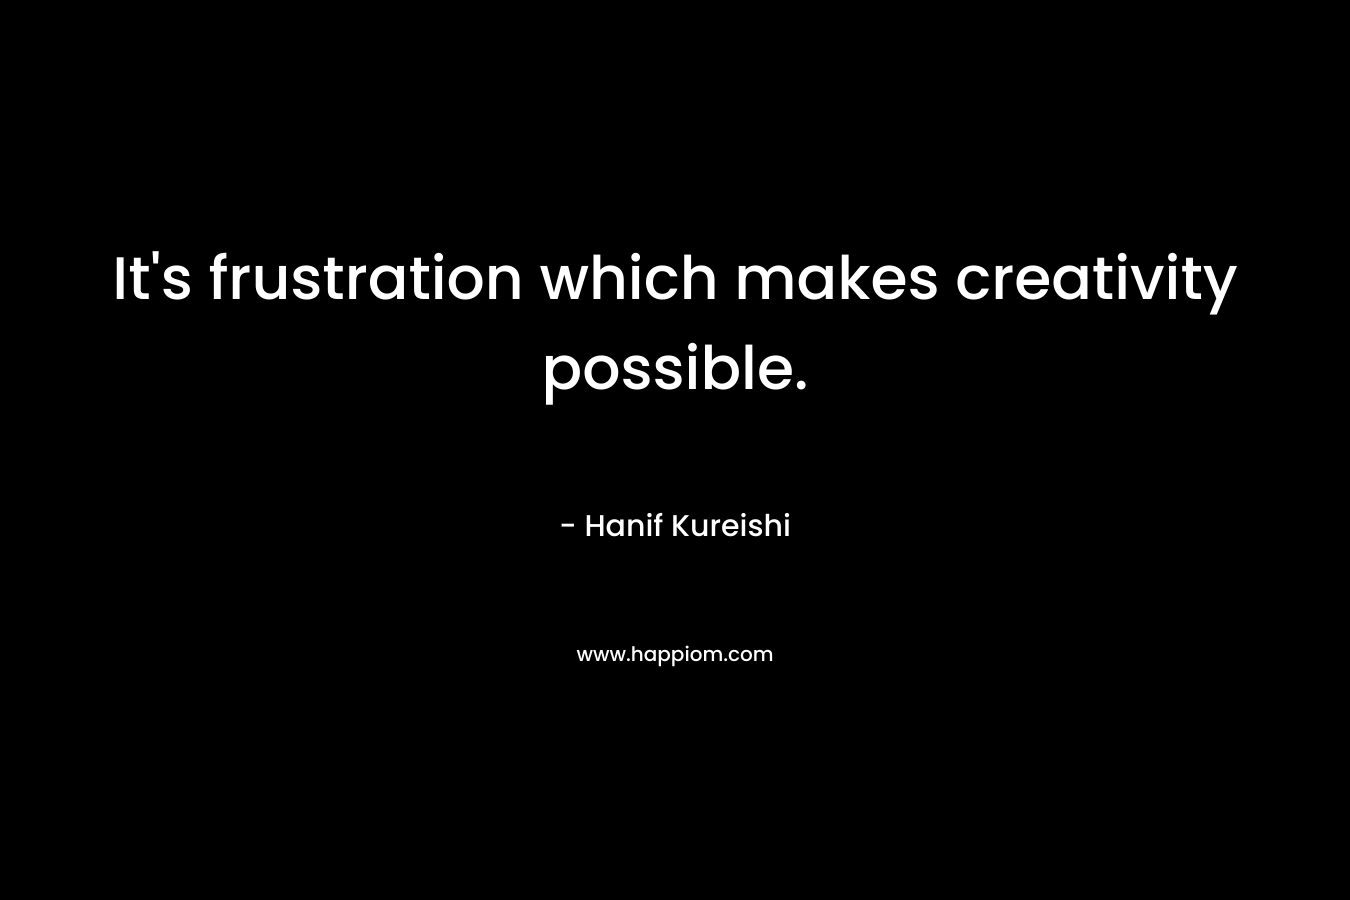 It’s frustration which makes creativity possible. – Hanif Kureishi